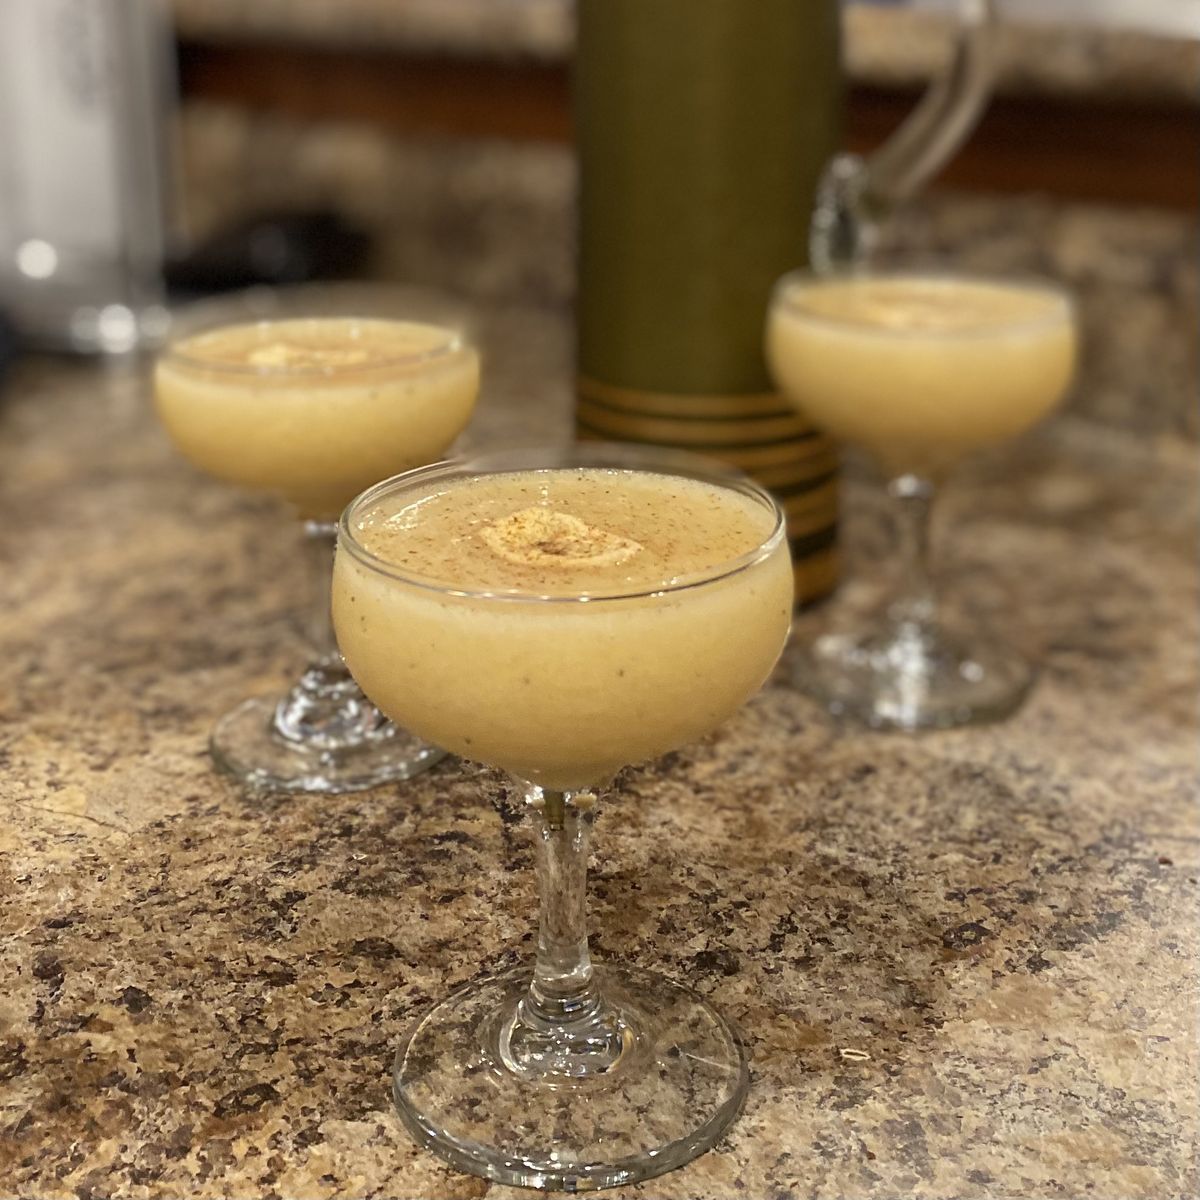 (Serves 6-8)

One for the homies. Here’s my expanded take on the Crucian Banana Squash, featuring a big extra punch of flavour.

A little cachaça brings grassy funk, while flavoured syrups give us rich baking spice flavours that go perfectly with banana. Angostura bitters deliver a much-needed bite.

The original recipe only calls for the rum, bananas, and lime juice, but I found it needs a bit of fattening with some Demerara. This version takes advantage of the larger format to get these deep signature flavours.

Recipe adapted from the “Crucian Banana Squash,”
Sprat Hall Plantation, St. Croix (1960s)